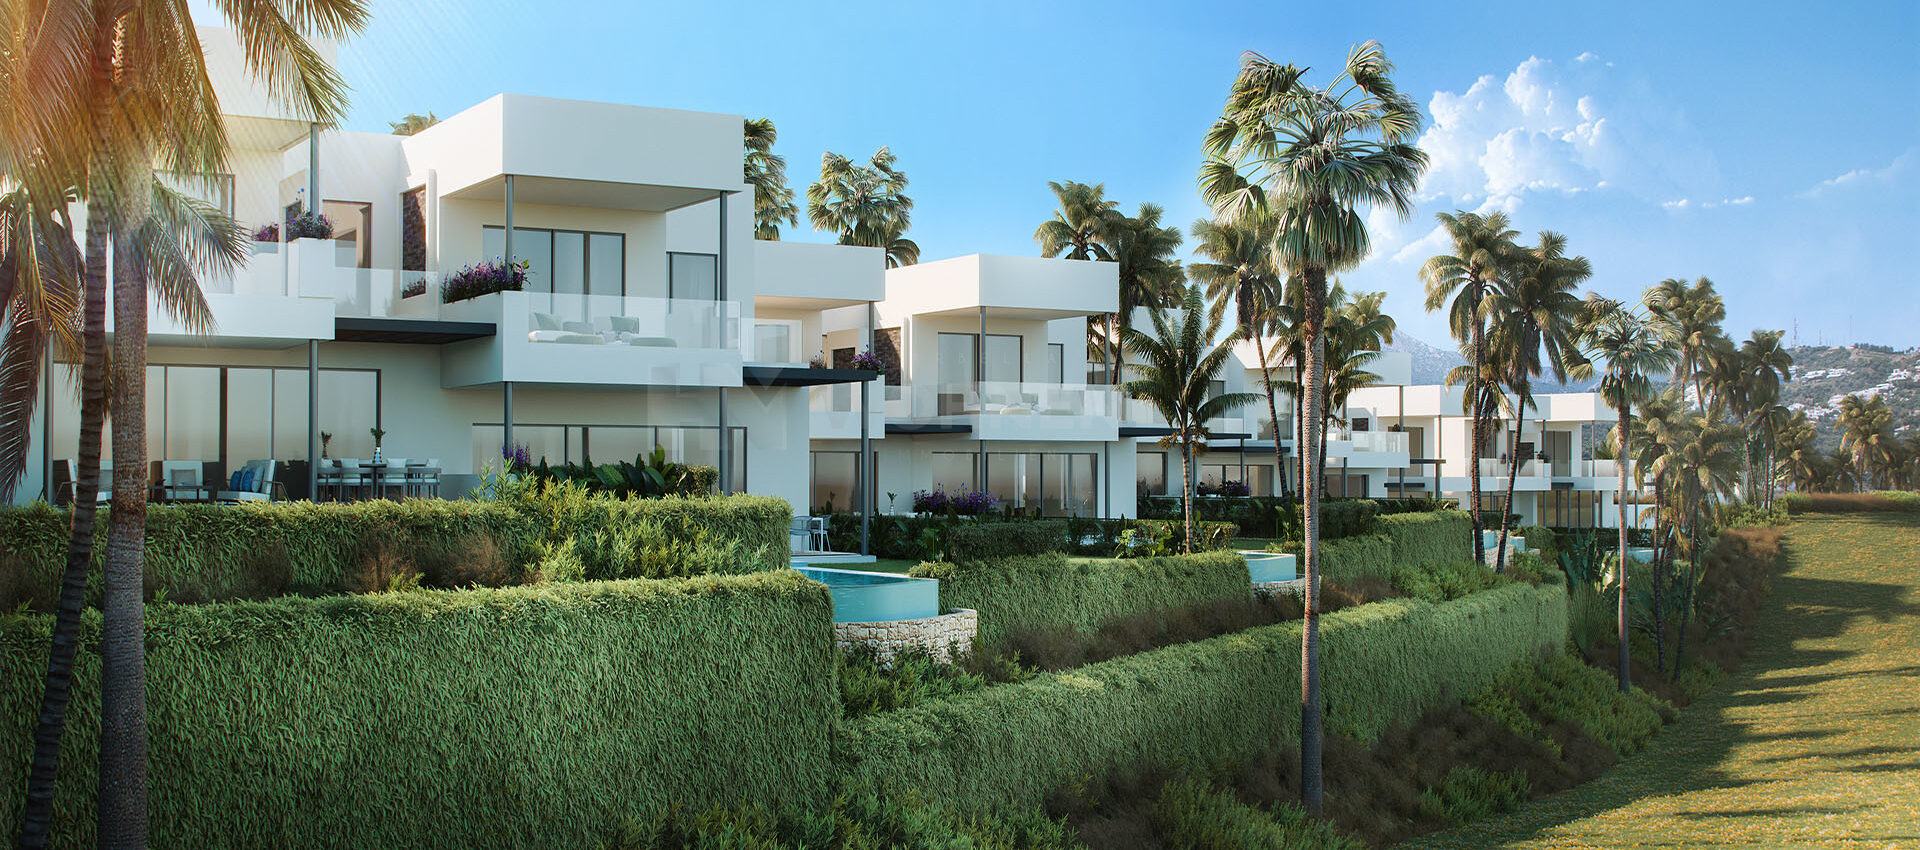 Semi-detached villas located in one of the best areas of Marbella